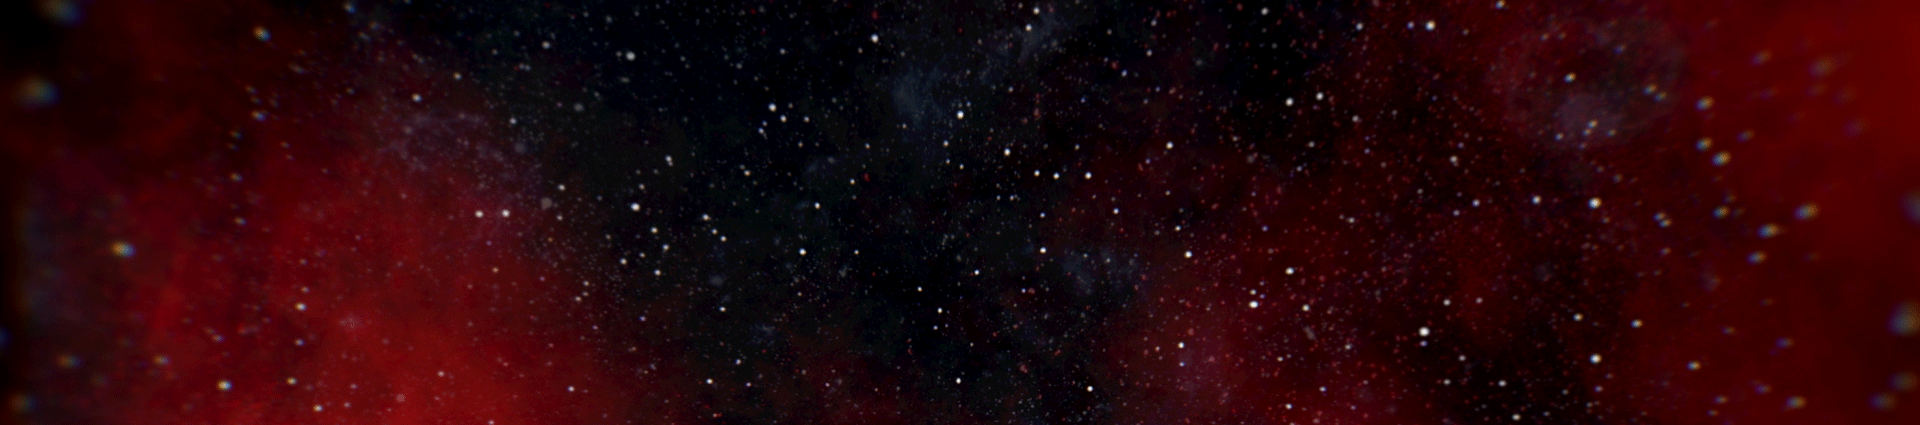 Red galaxy background